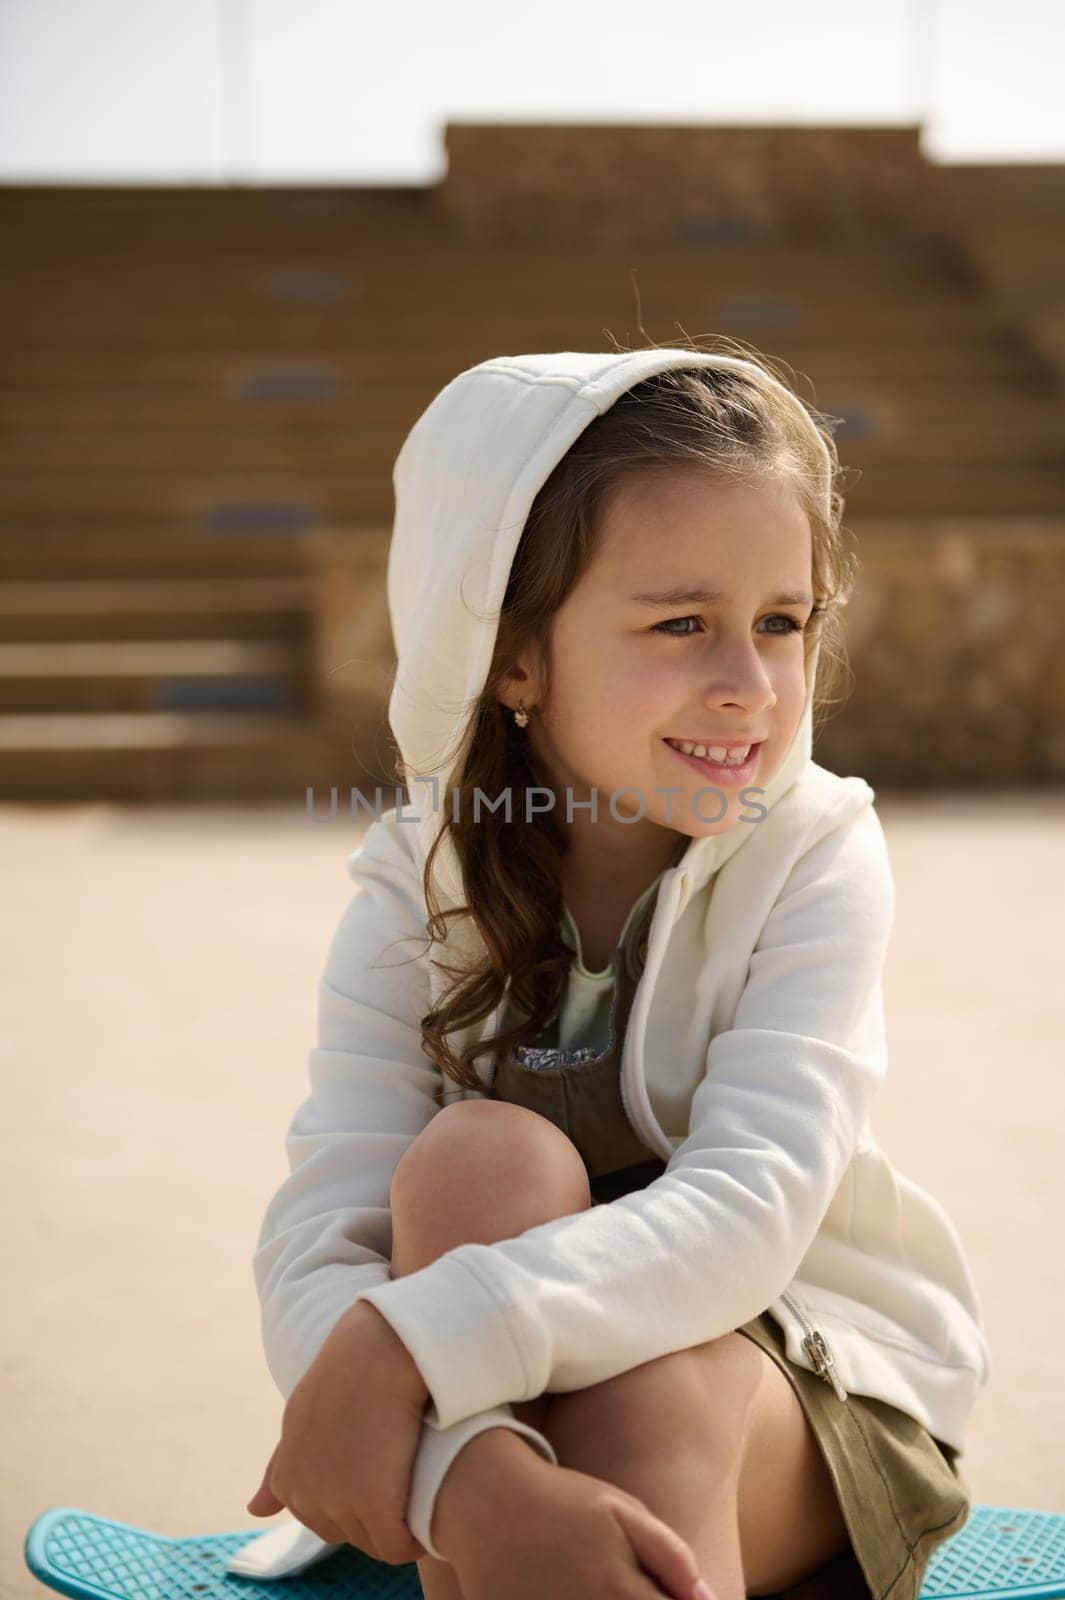 Close-up stylish little kid girl sitting on her blue skateboard, smiling dreamily looking away, dressed in beige hoodie by artgf